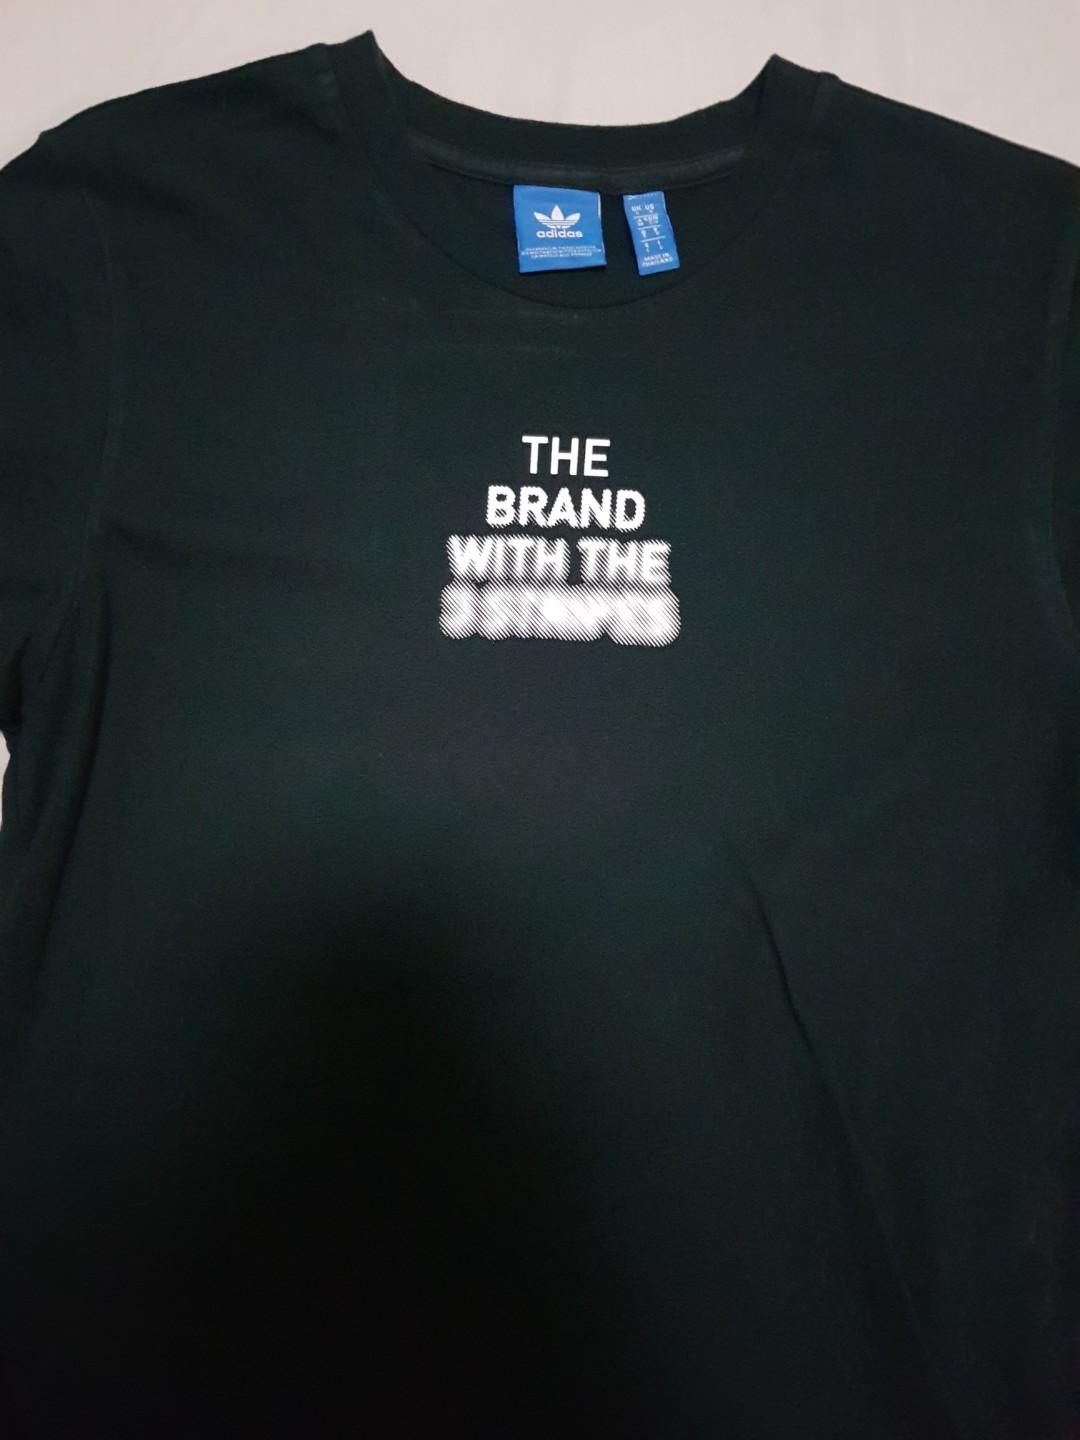 the brand with the 3 stripes shirt